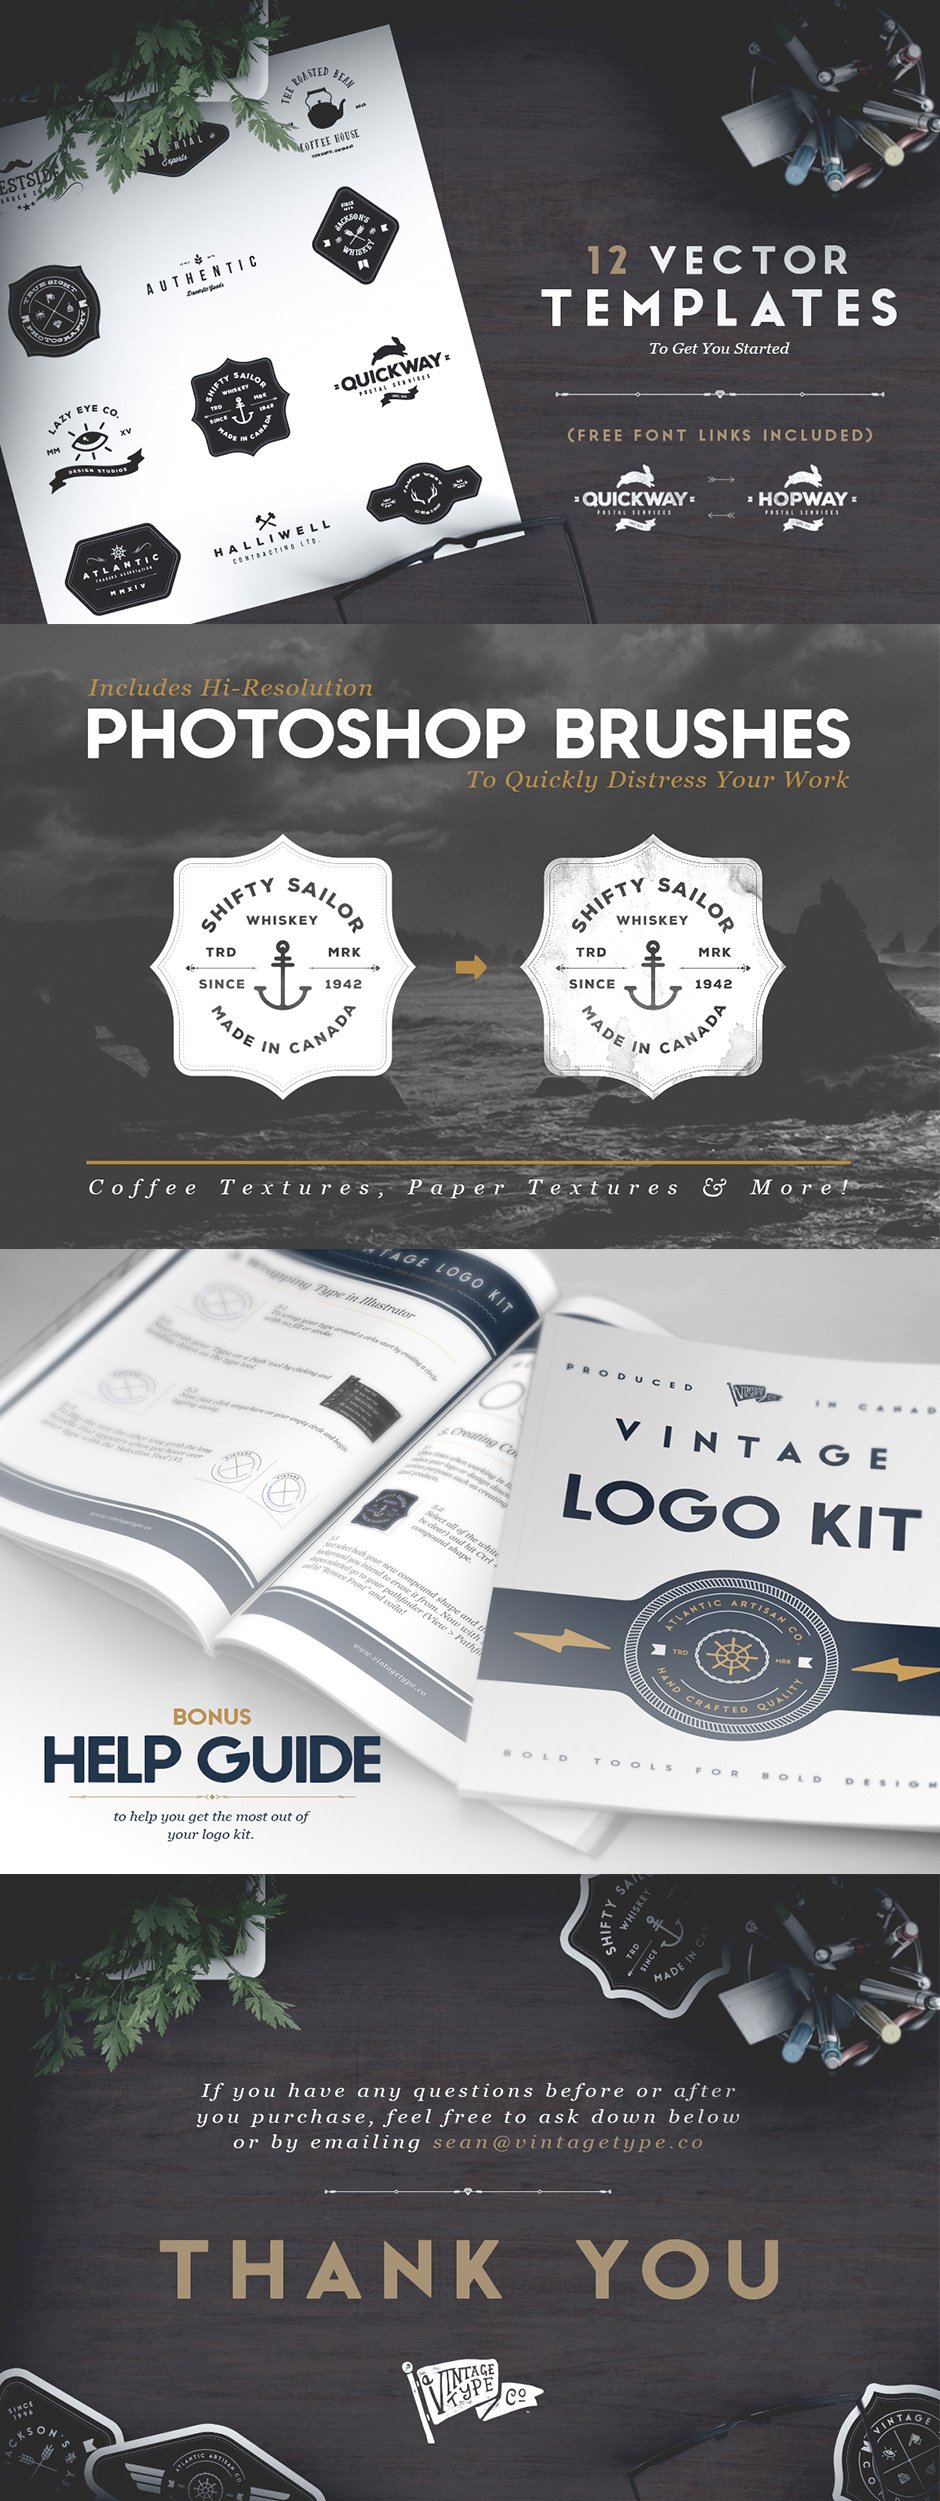 The Complete Vector Design Toolkit